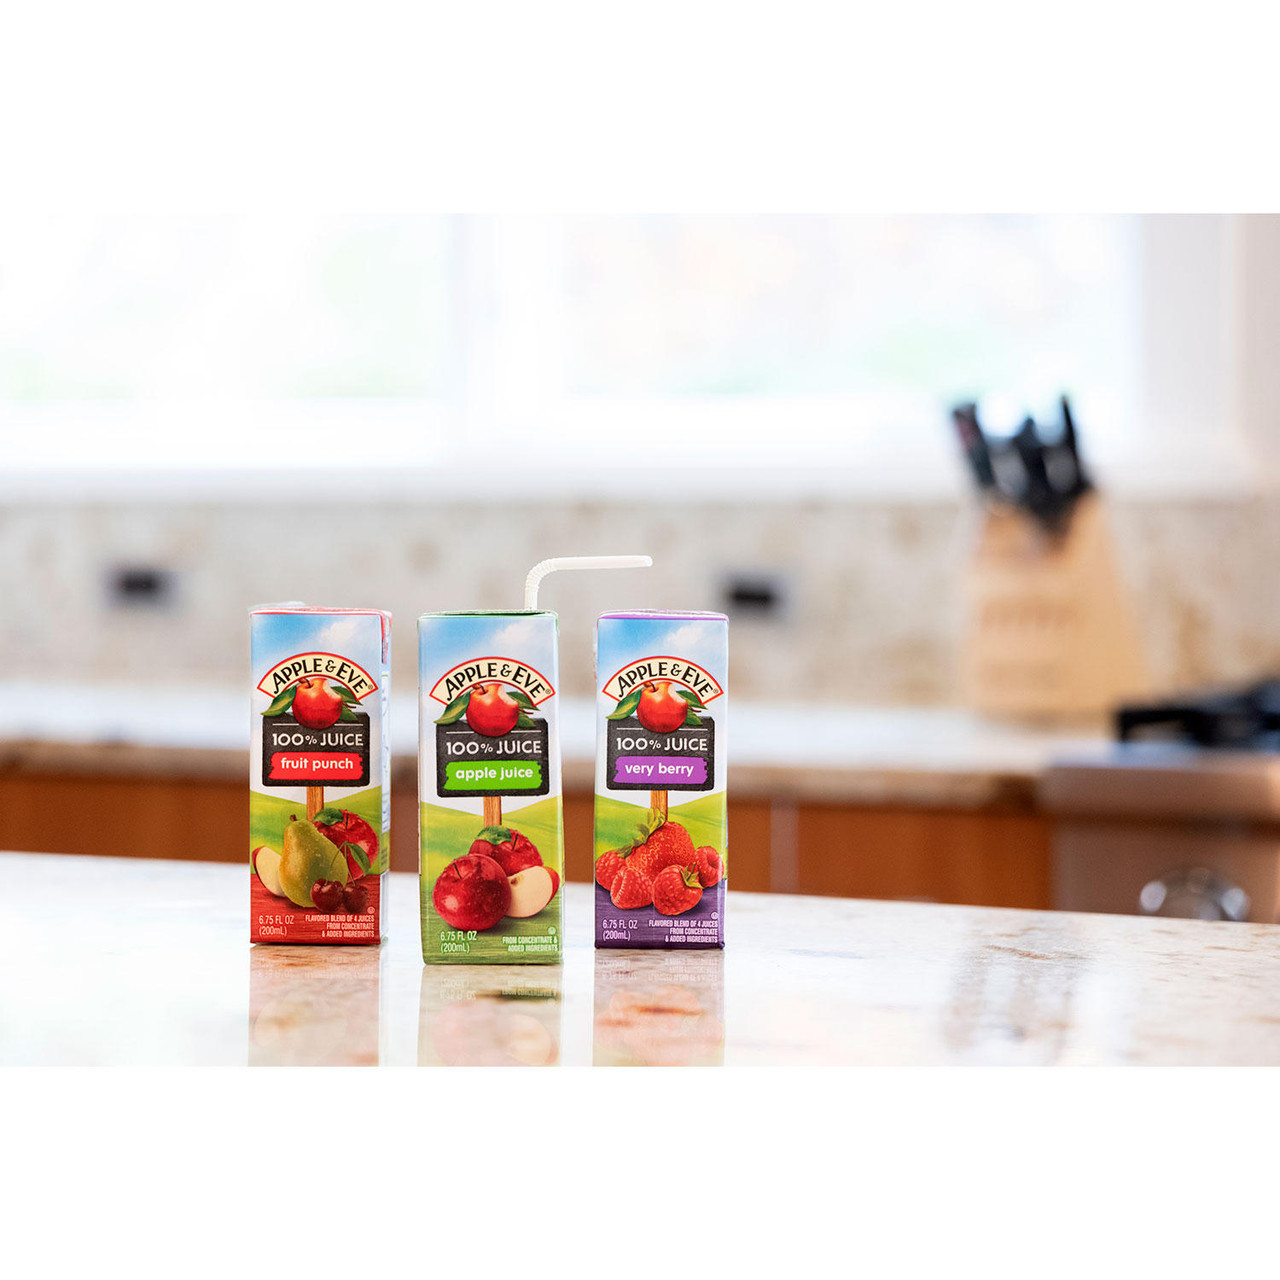 Apple & Eve 100% Juice Variety Pack (6.75 fl. oz., 36 pk.) - [From 53.67 - Choose pk Qty ] - *Ships from Miami